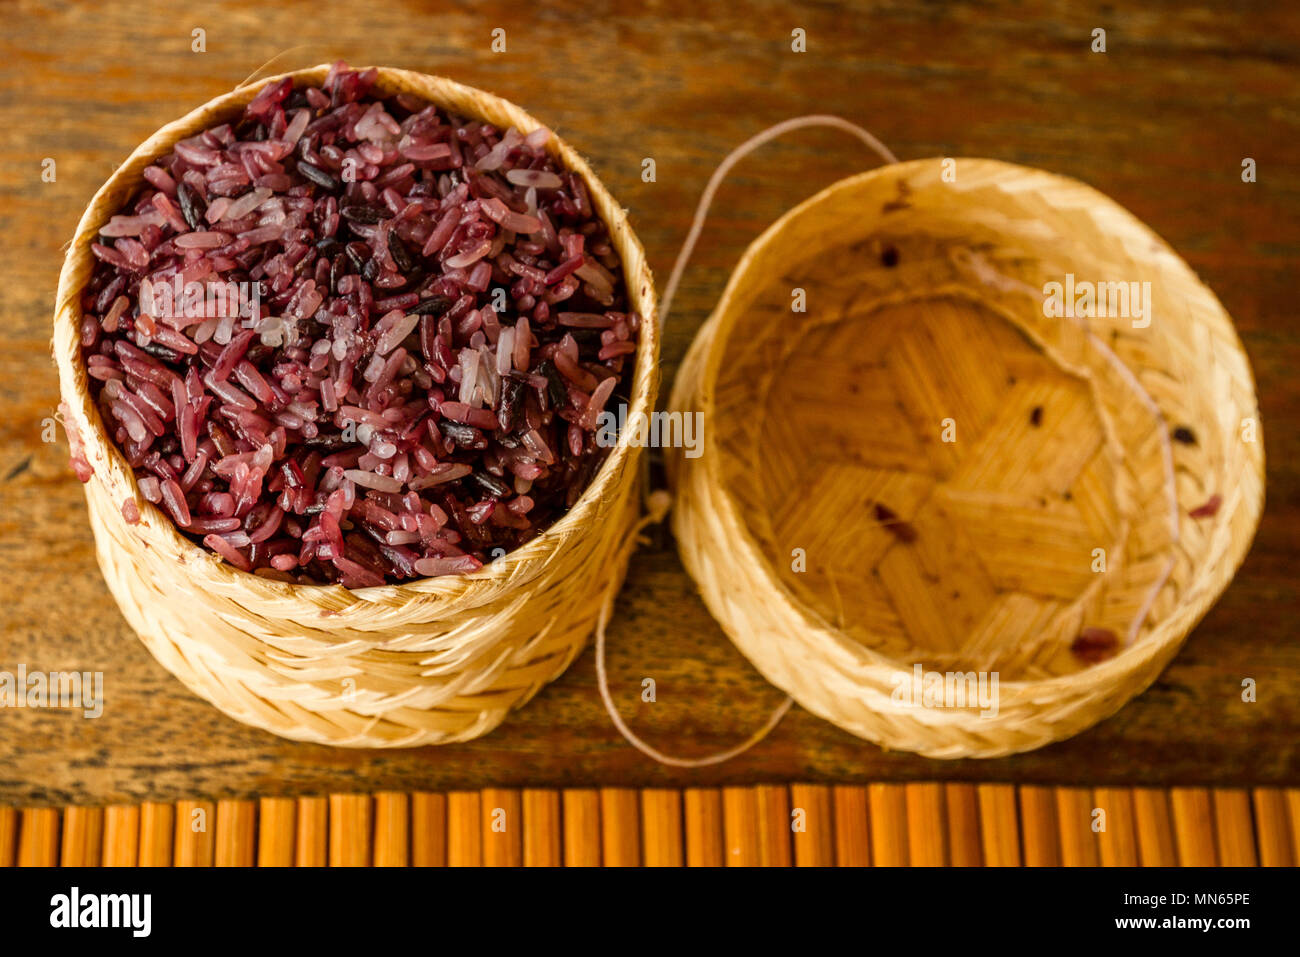 Purple sticky rice in a traditional serving basket, Laos Stock Photo